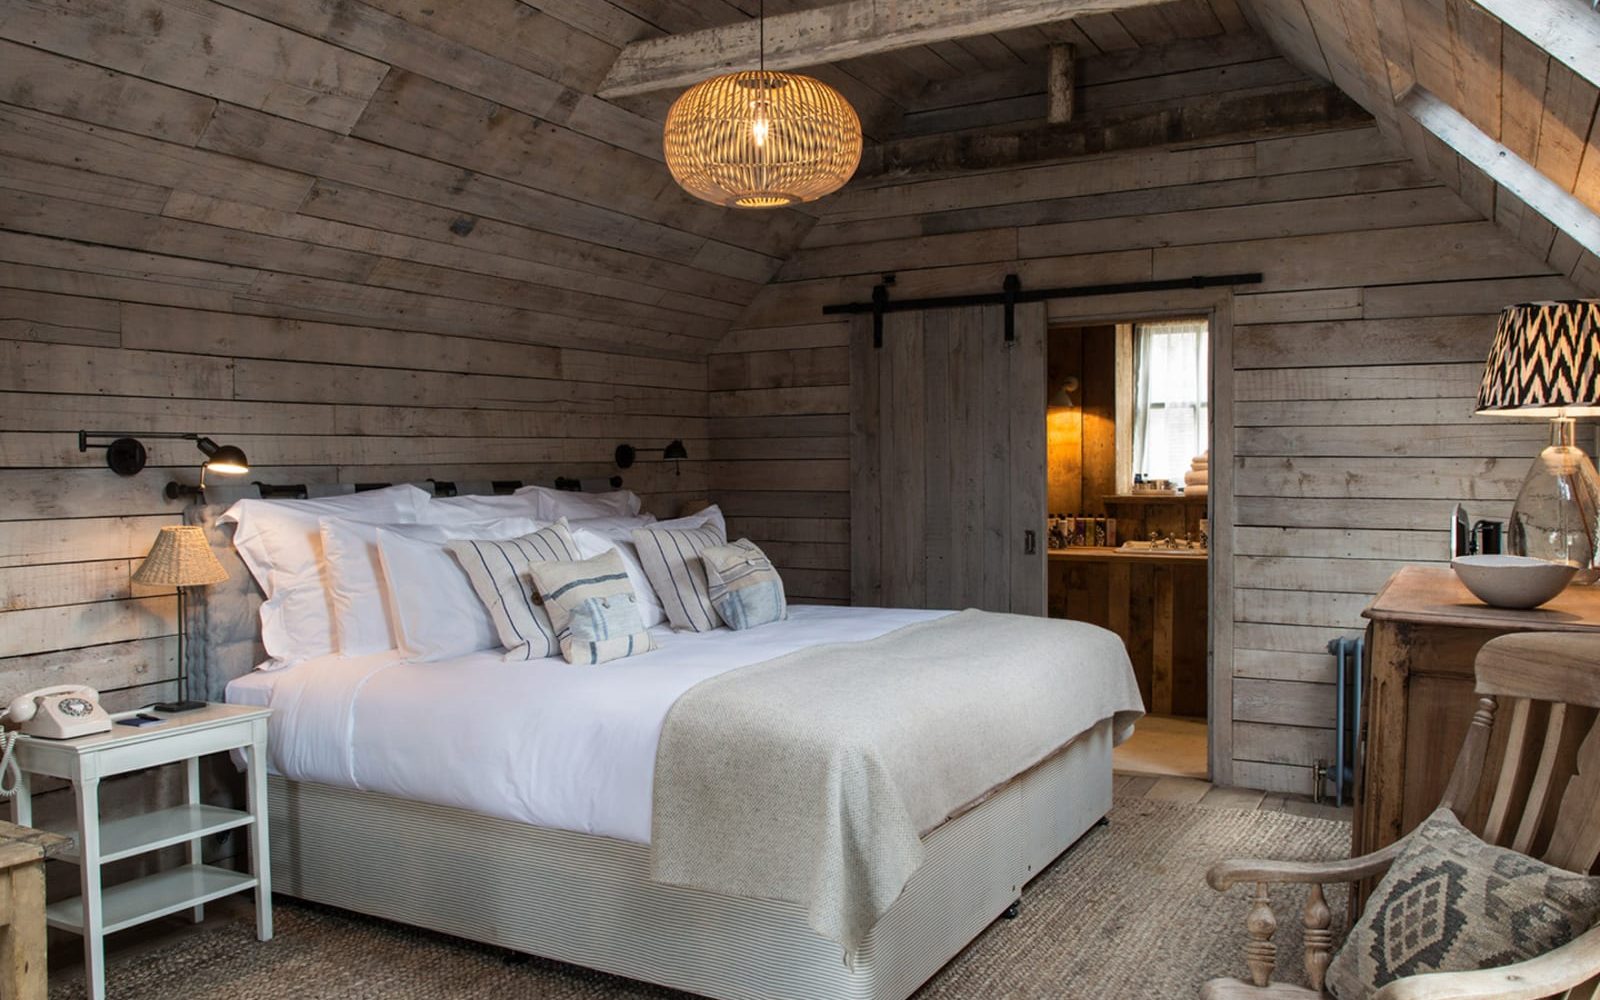 Best hotels in the Cotswolds - Soho Farmhouse